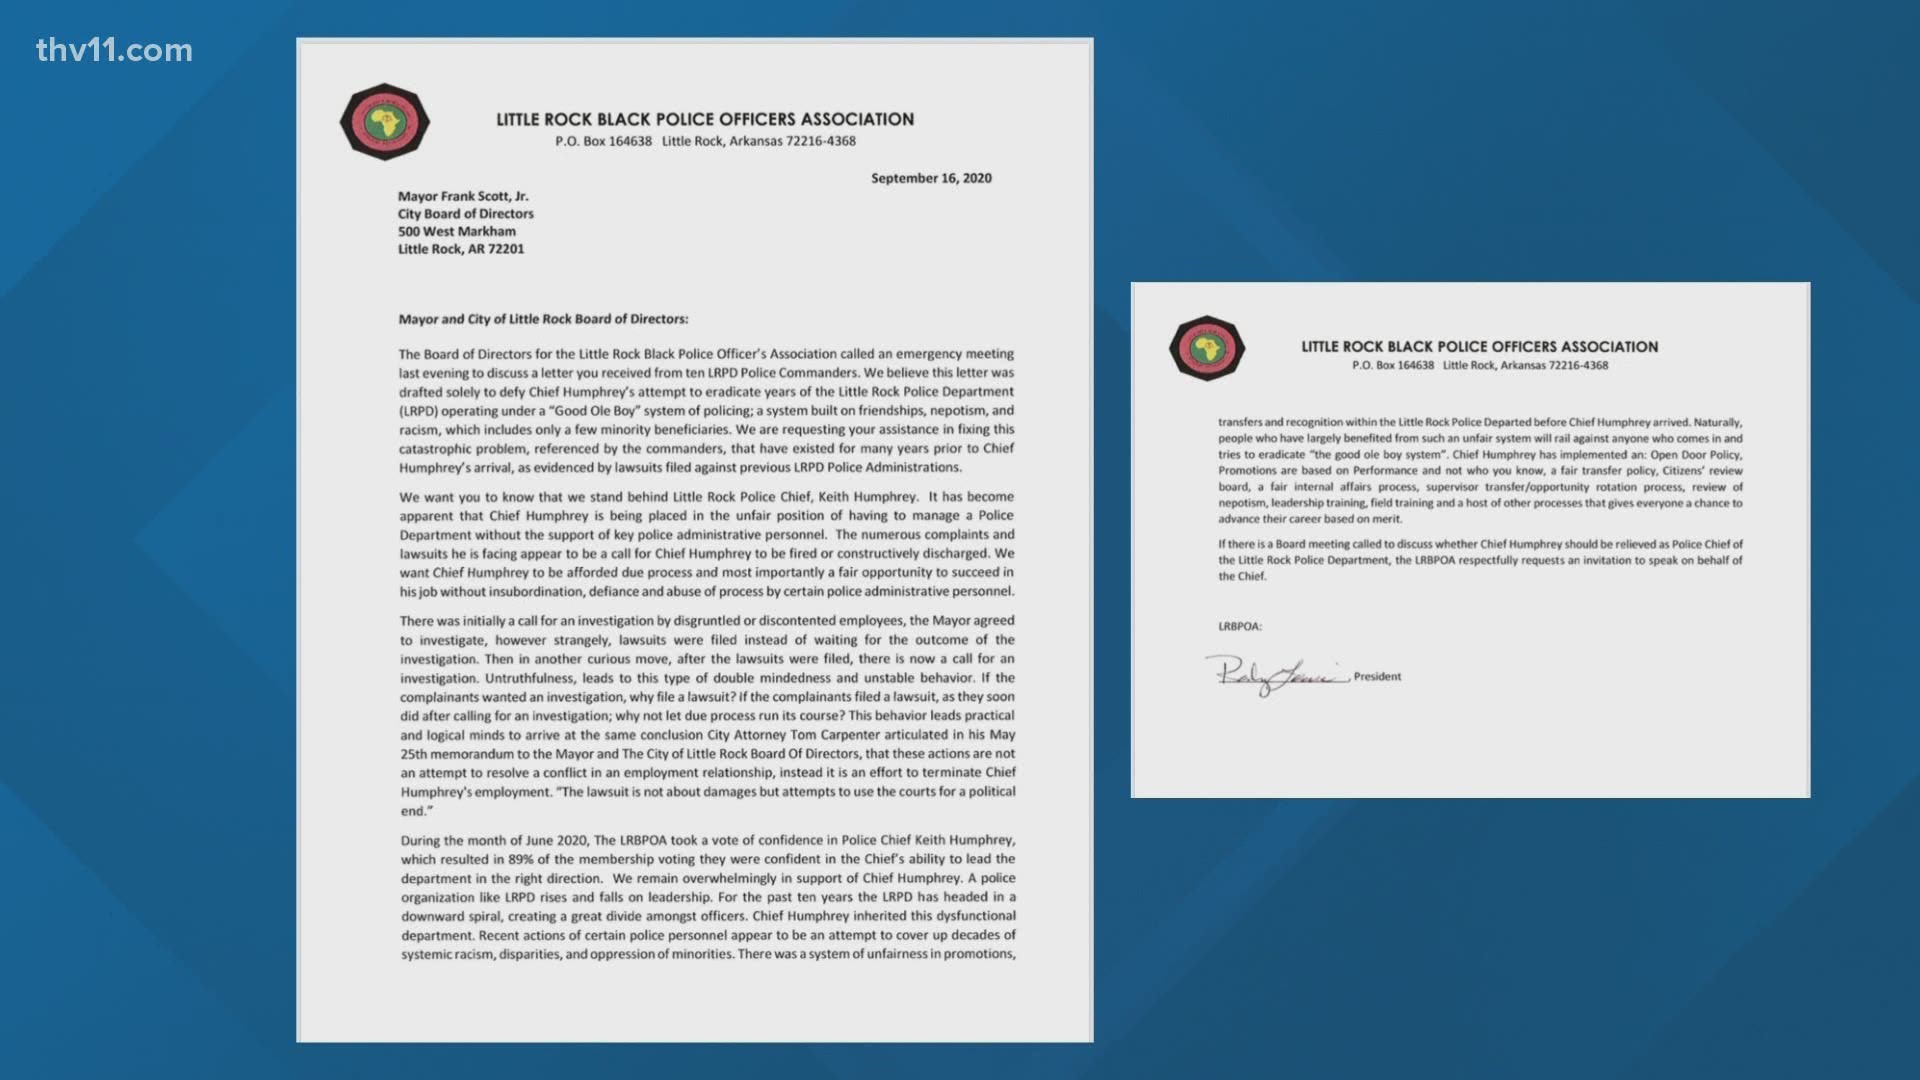 The Little Rock Black Officers Association released their own statement standing with Chief Keith Humphrey after new allegations against him arose this week.